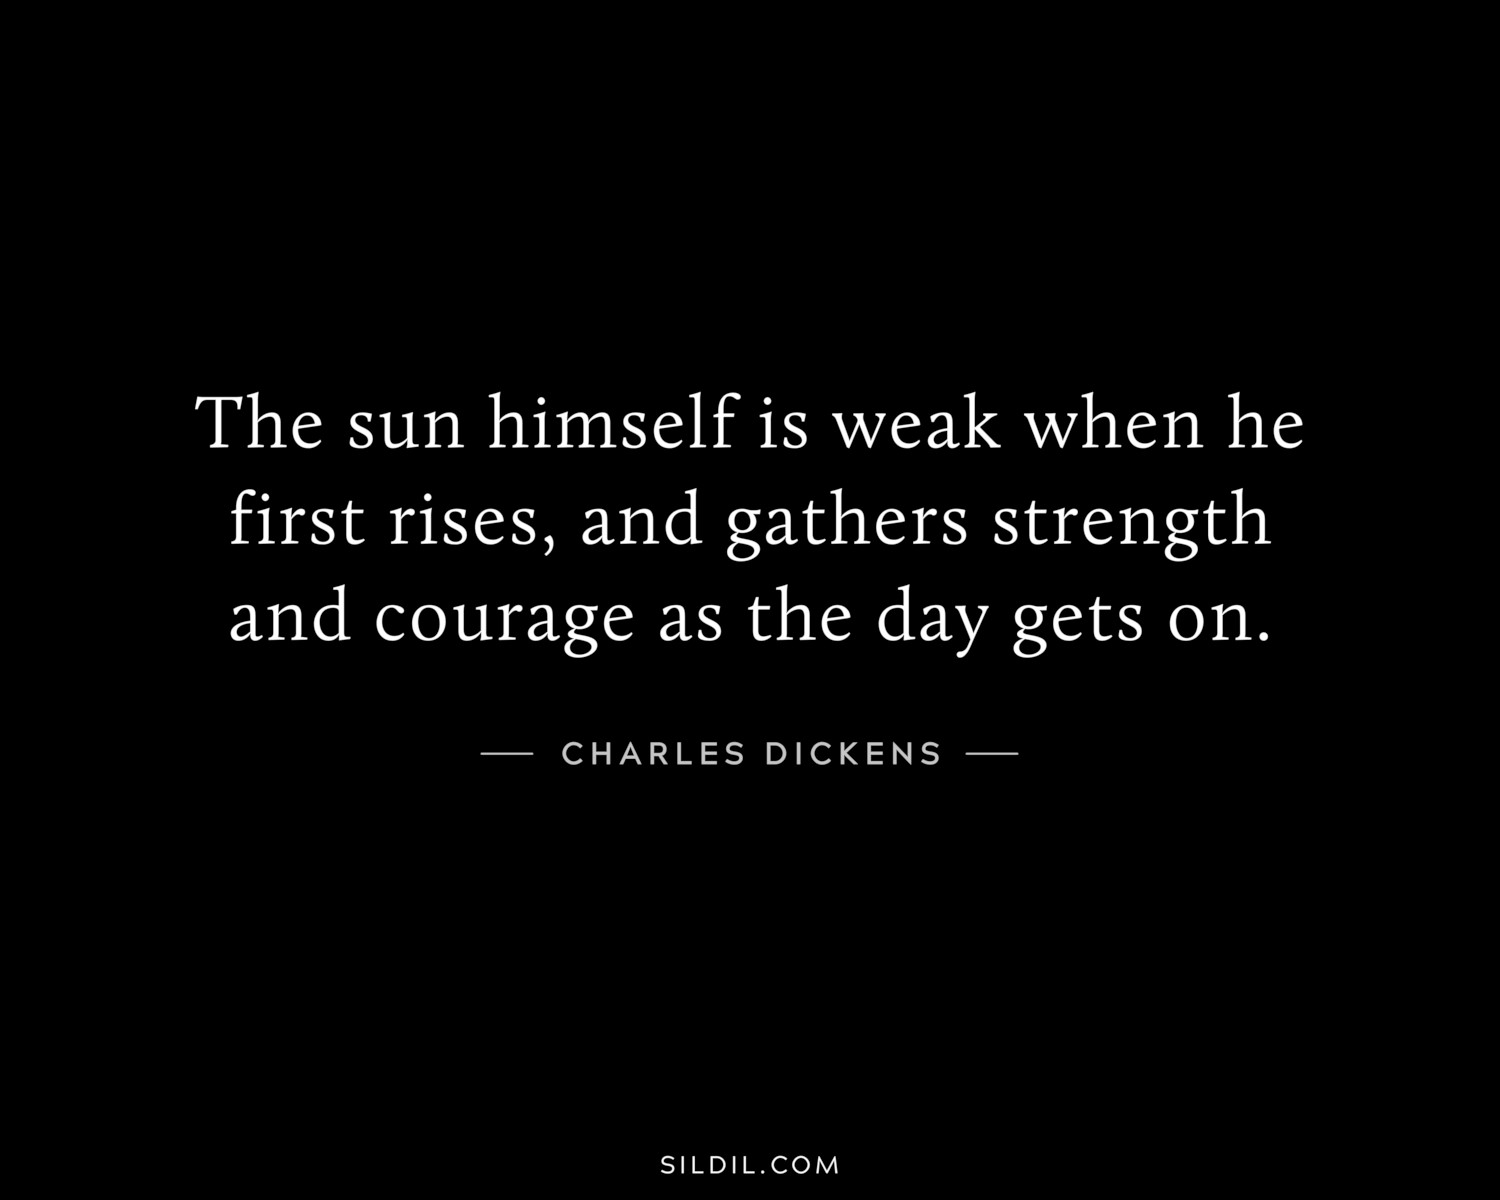 The sun himself is weak when he first rises, and gathers strength and courage as the day gets on.